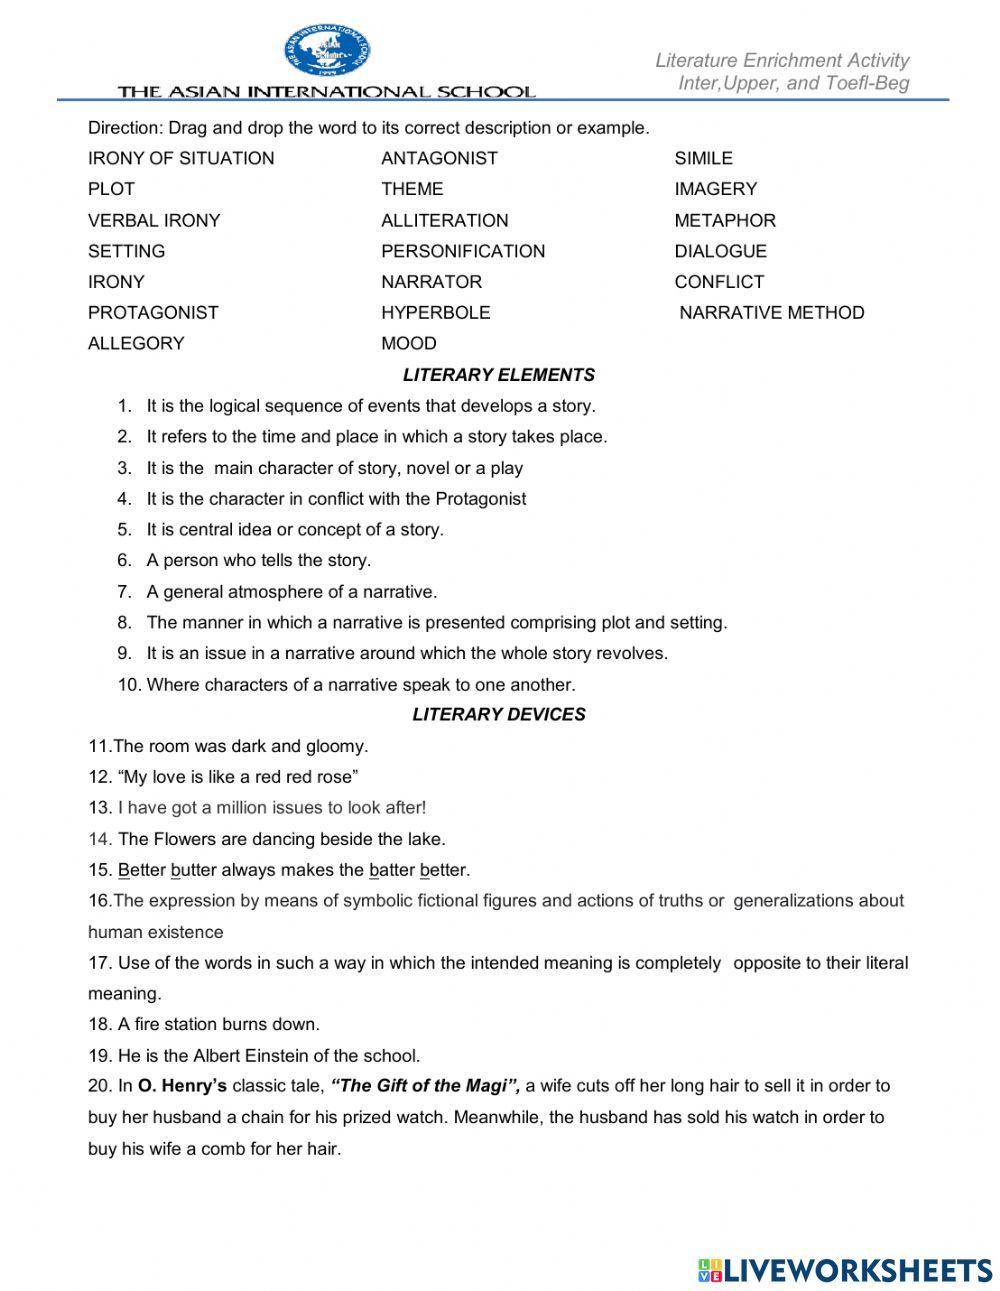 Literary Elements and Devices worksheet | Live Worksheets